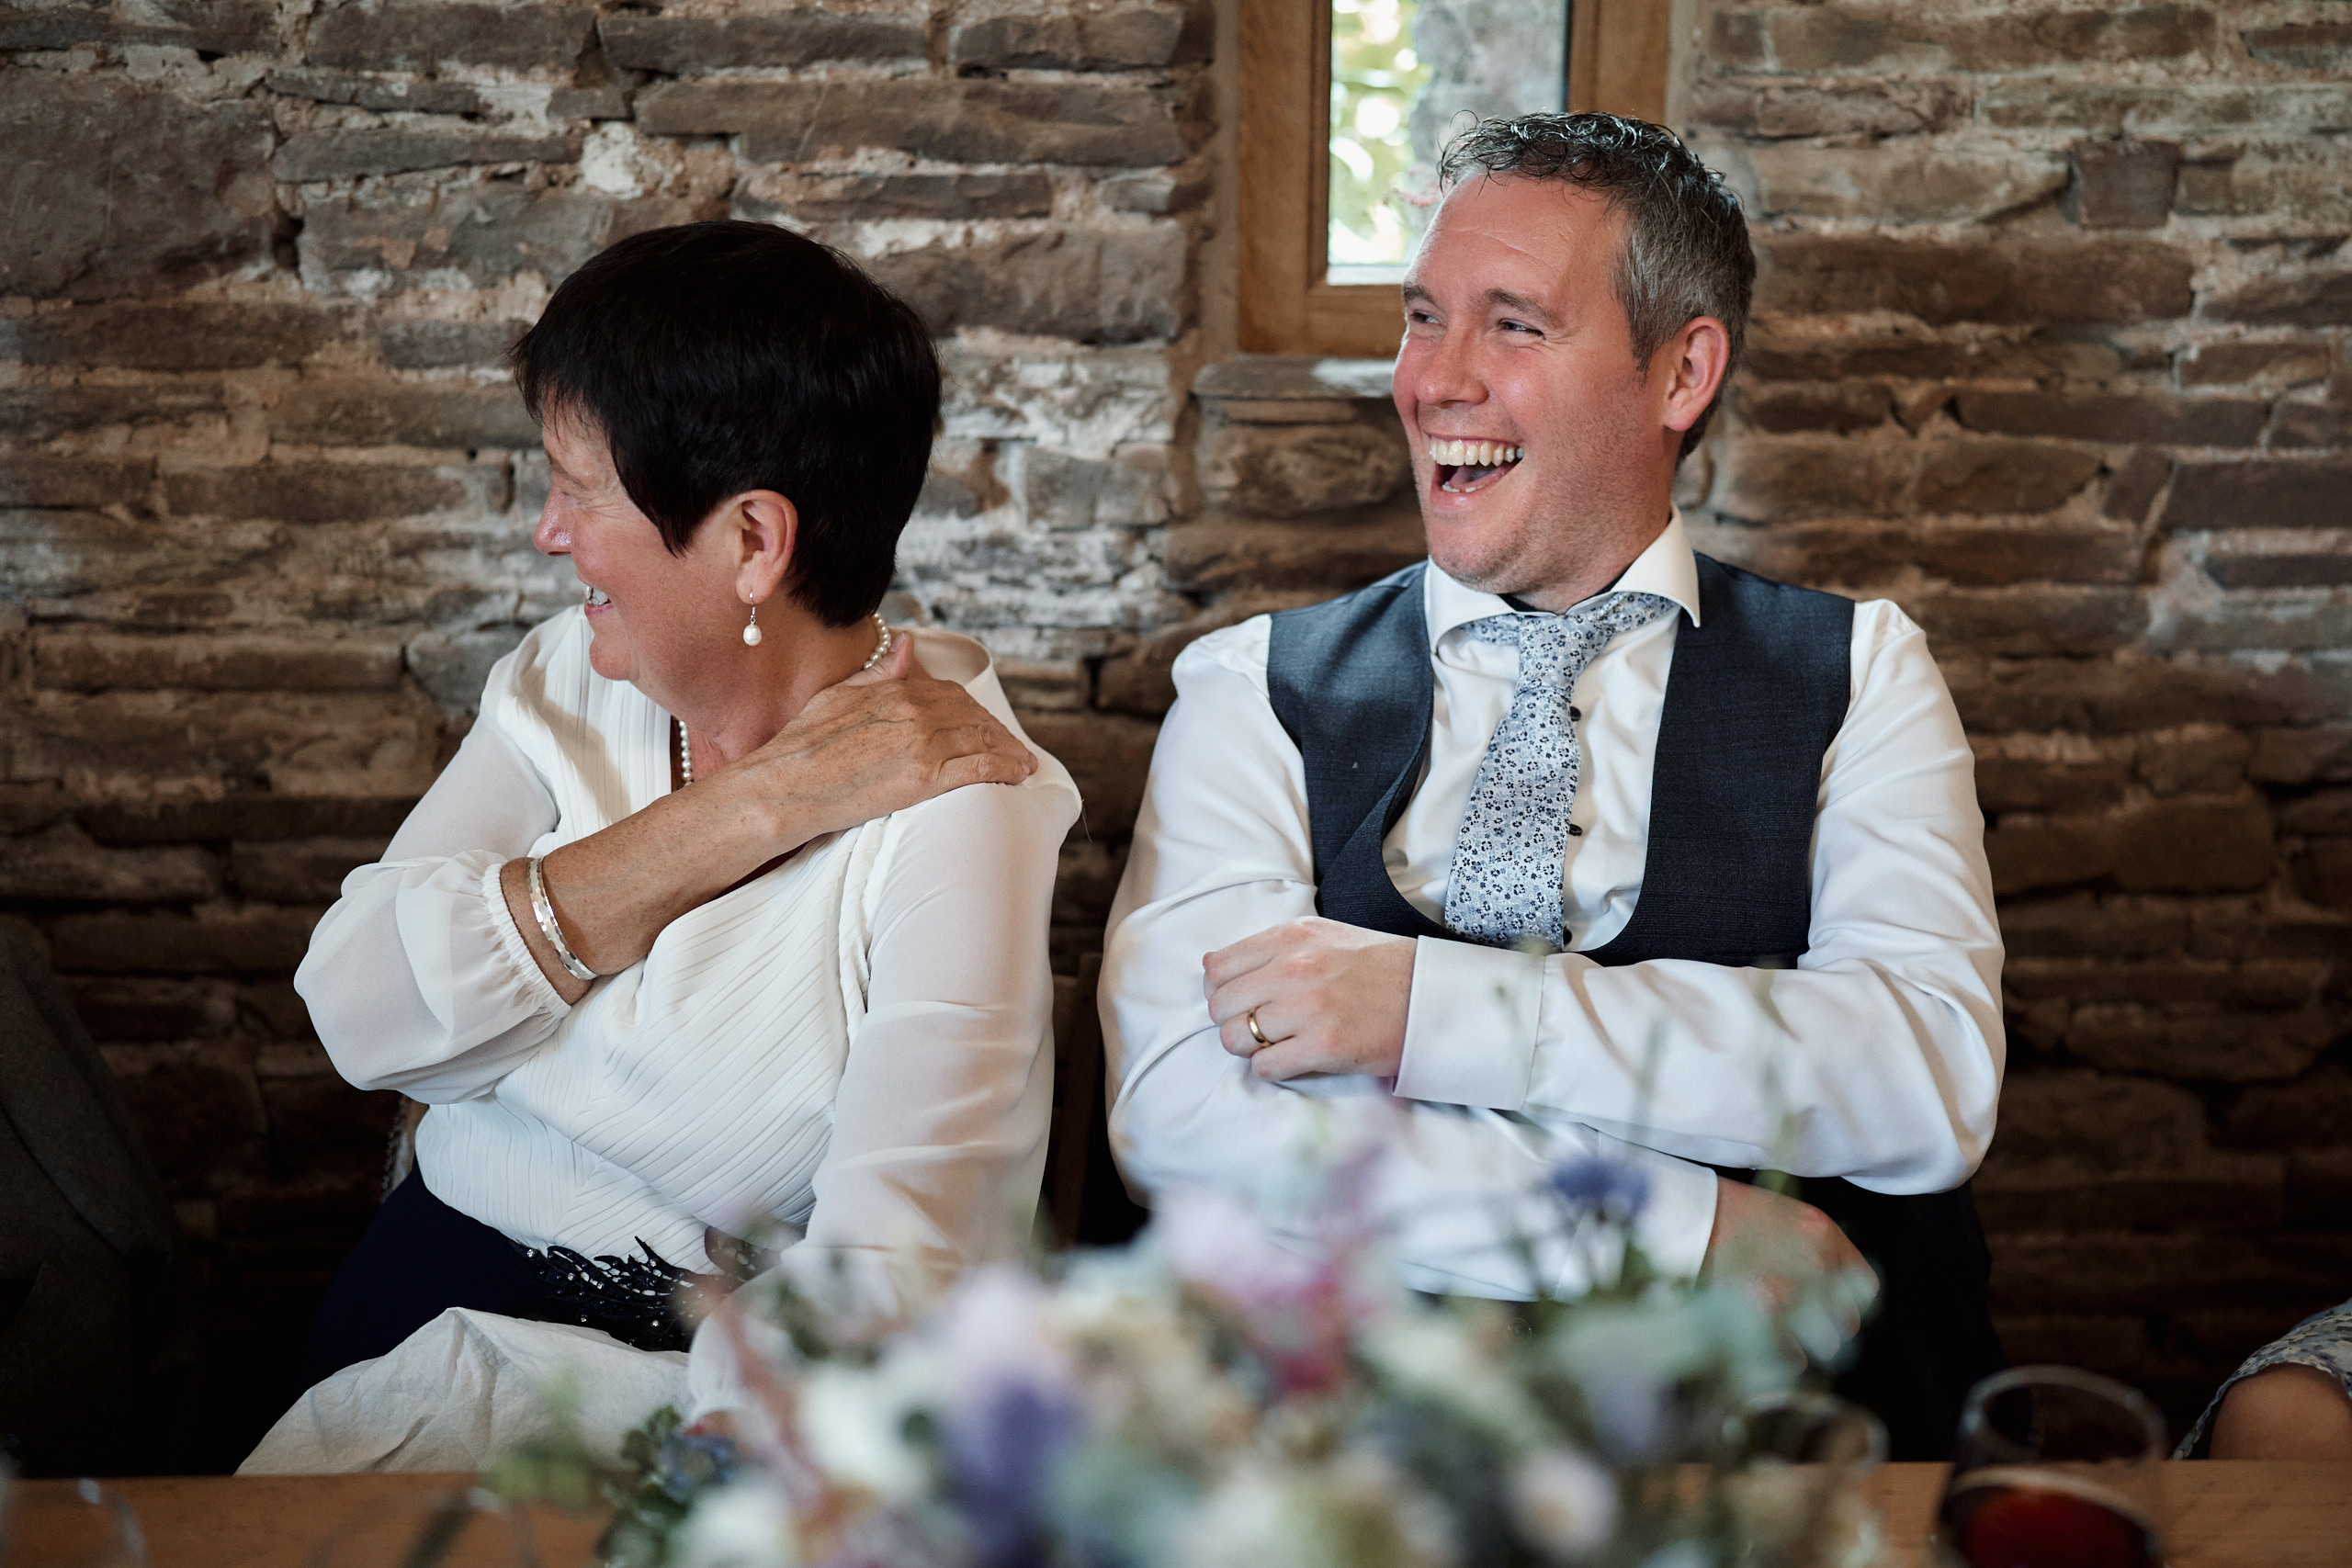 A guy and a girl cracking up at a table during a wedding.